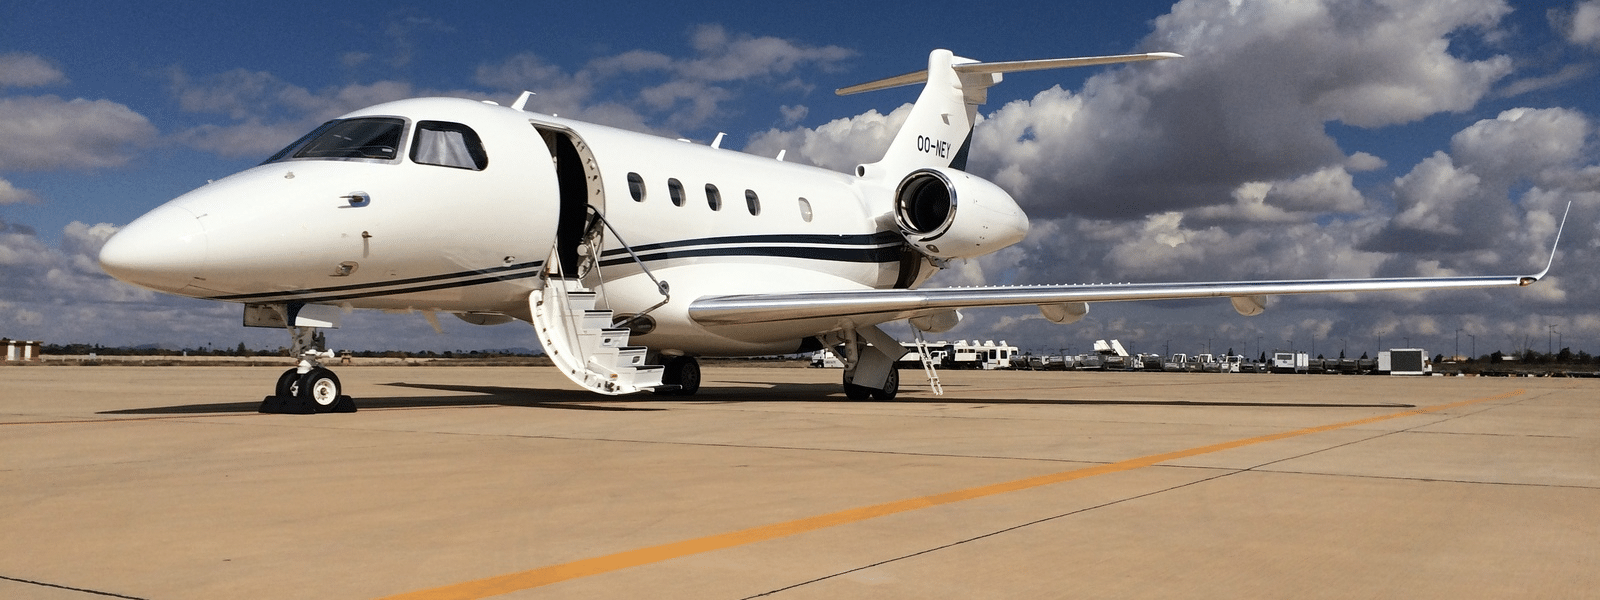 Download Private Jets For Sale California Pics